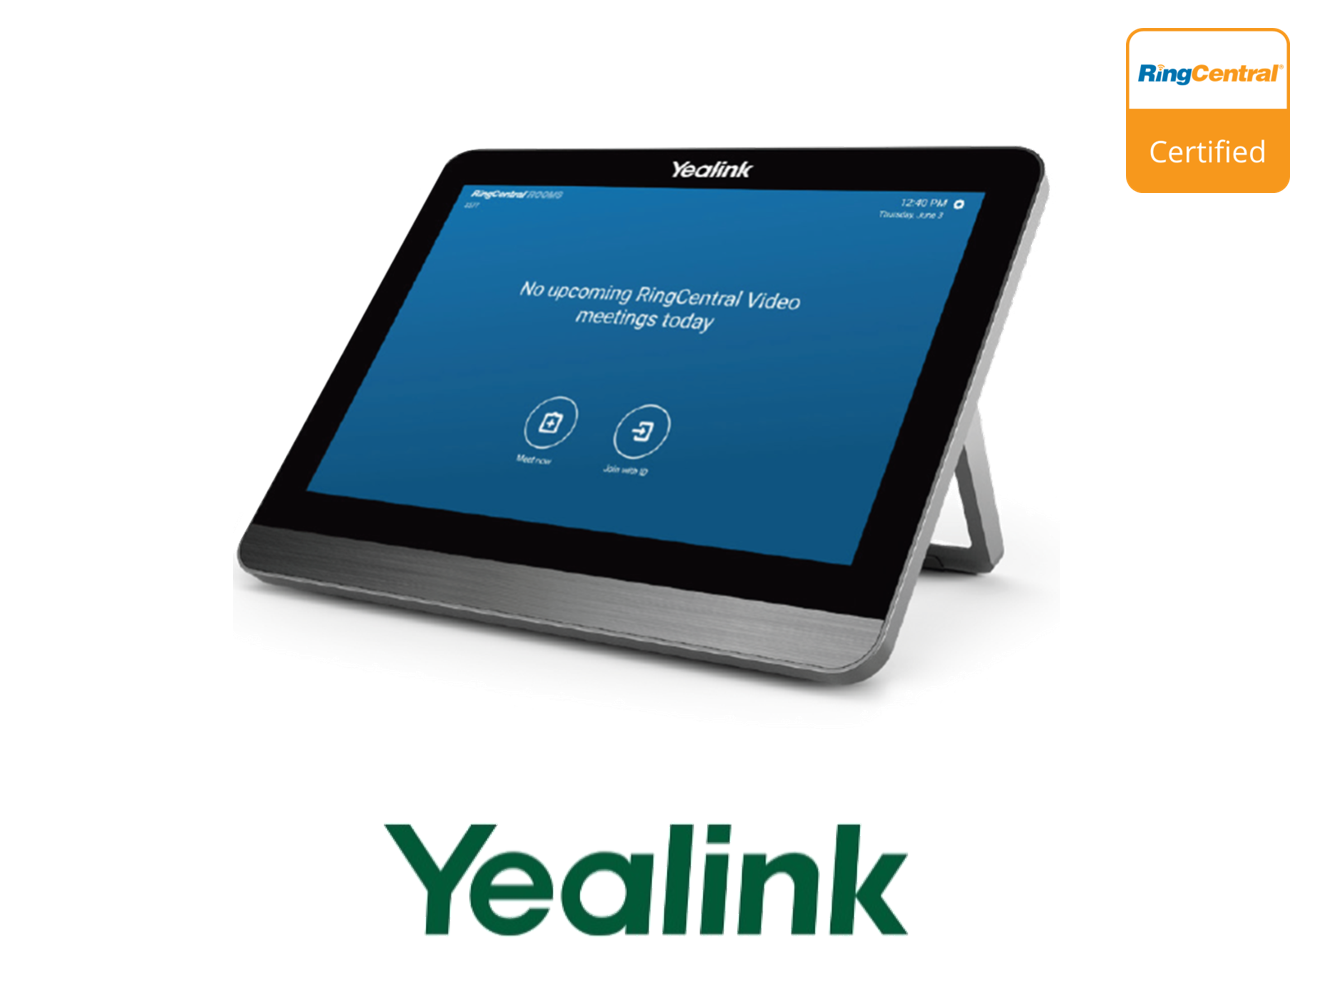 Yealink MeetingBar A30 with CTP18 Room Controller RingCentral Kit